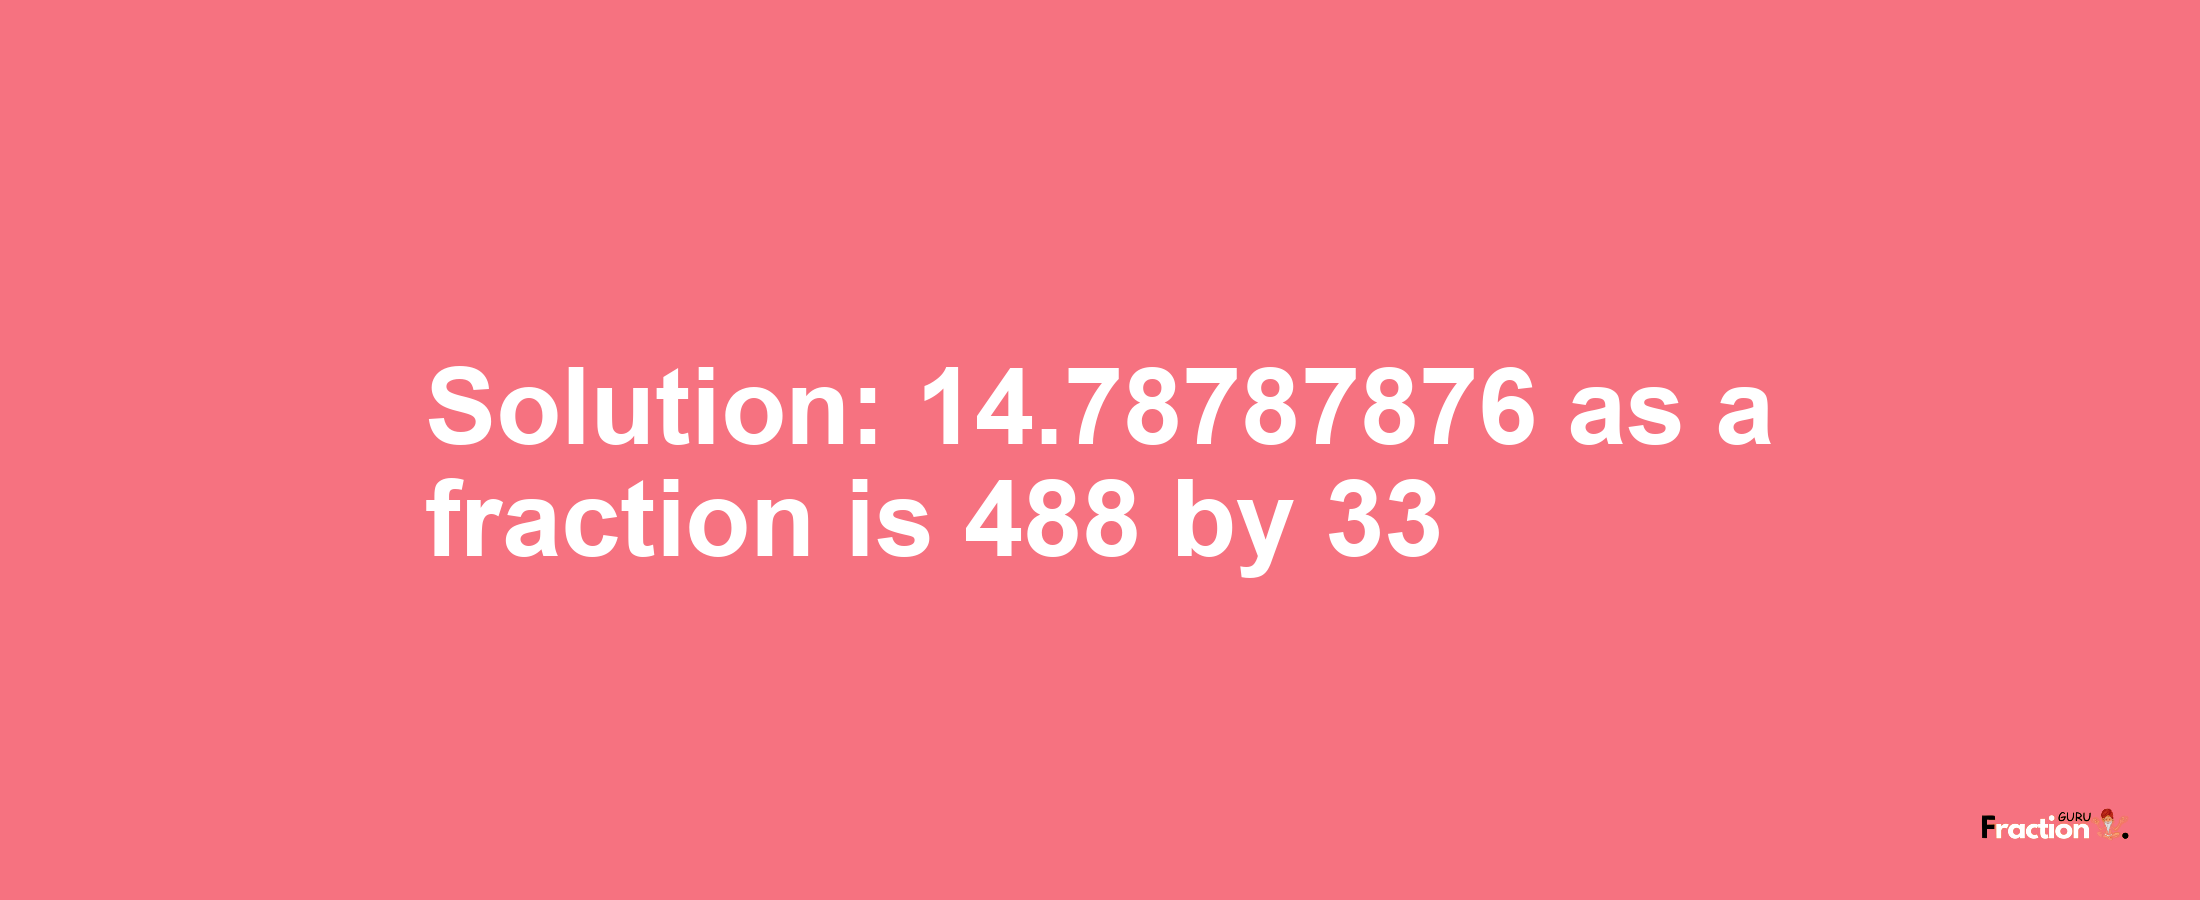 Solution:14.78787876 as a fraction is 488/33